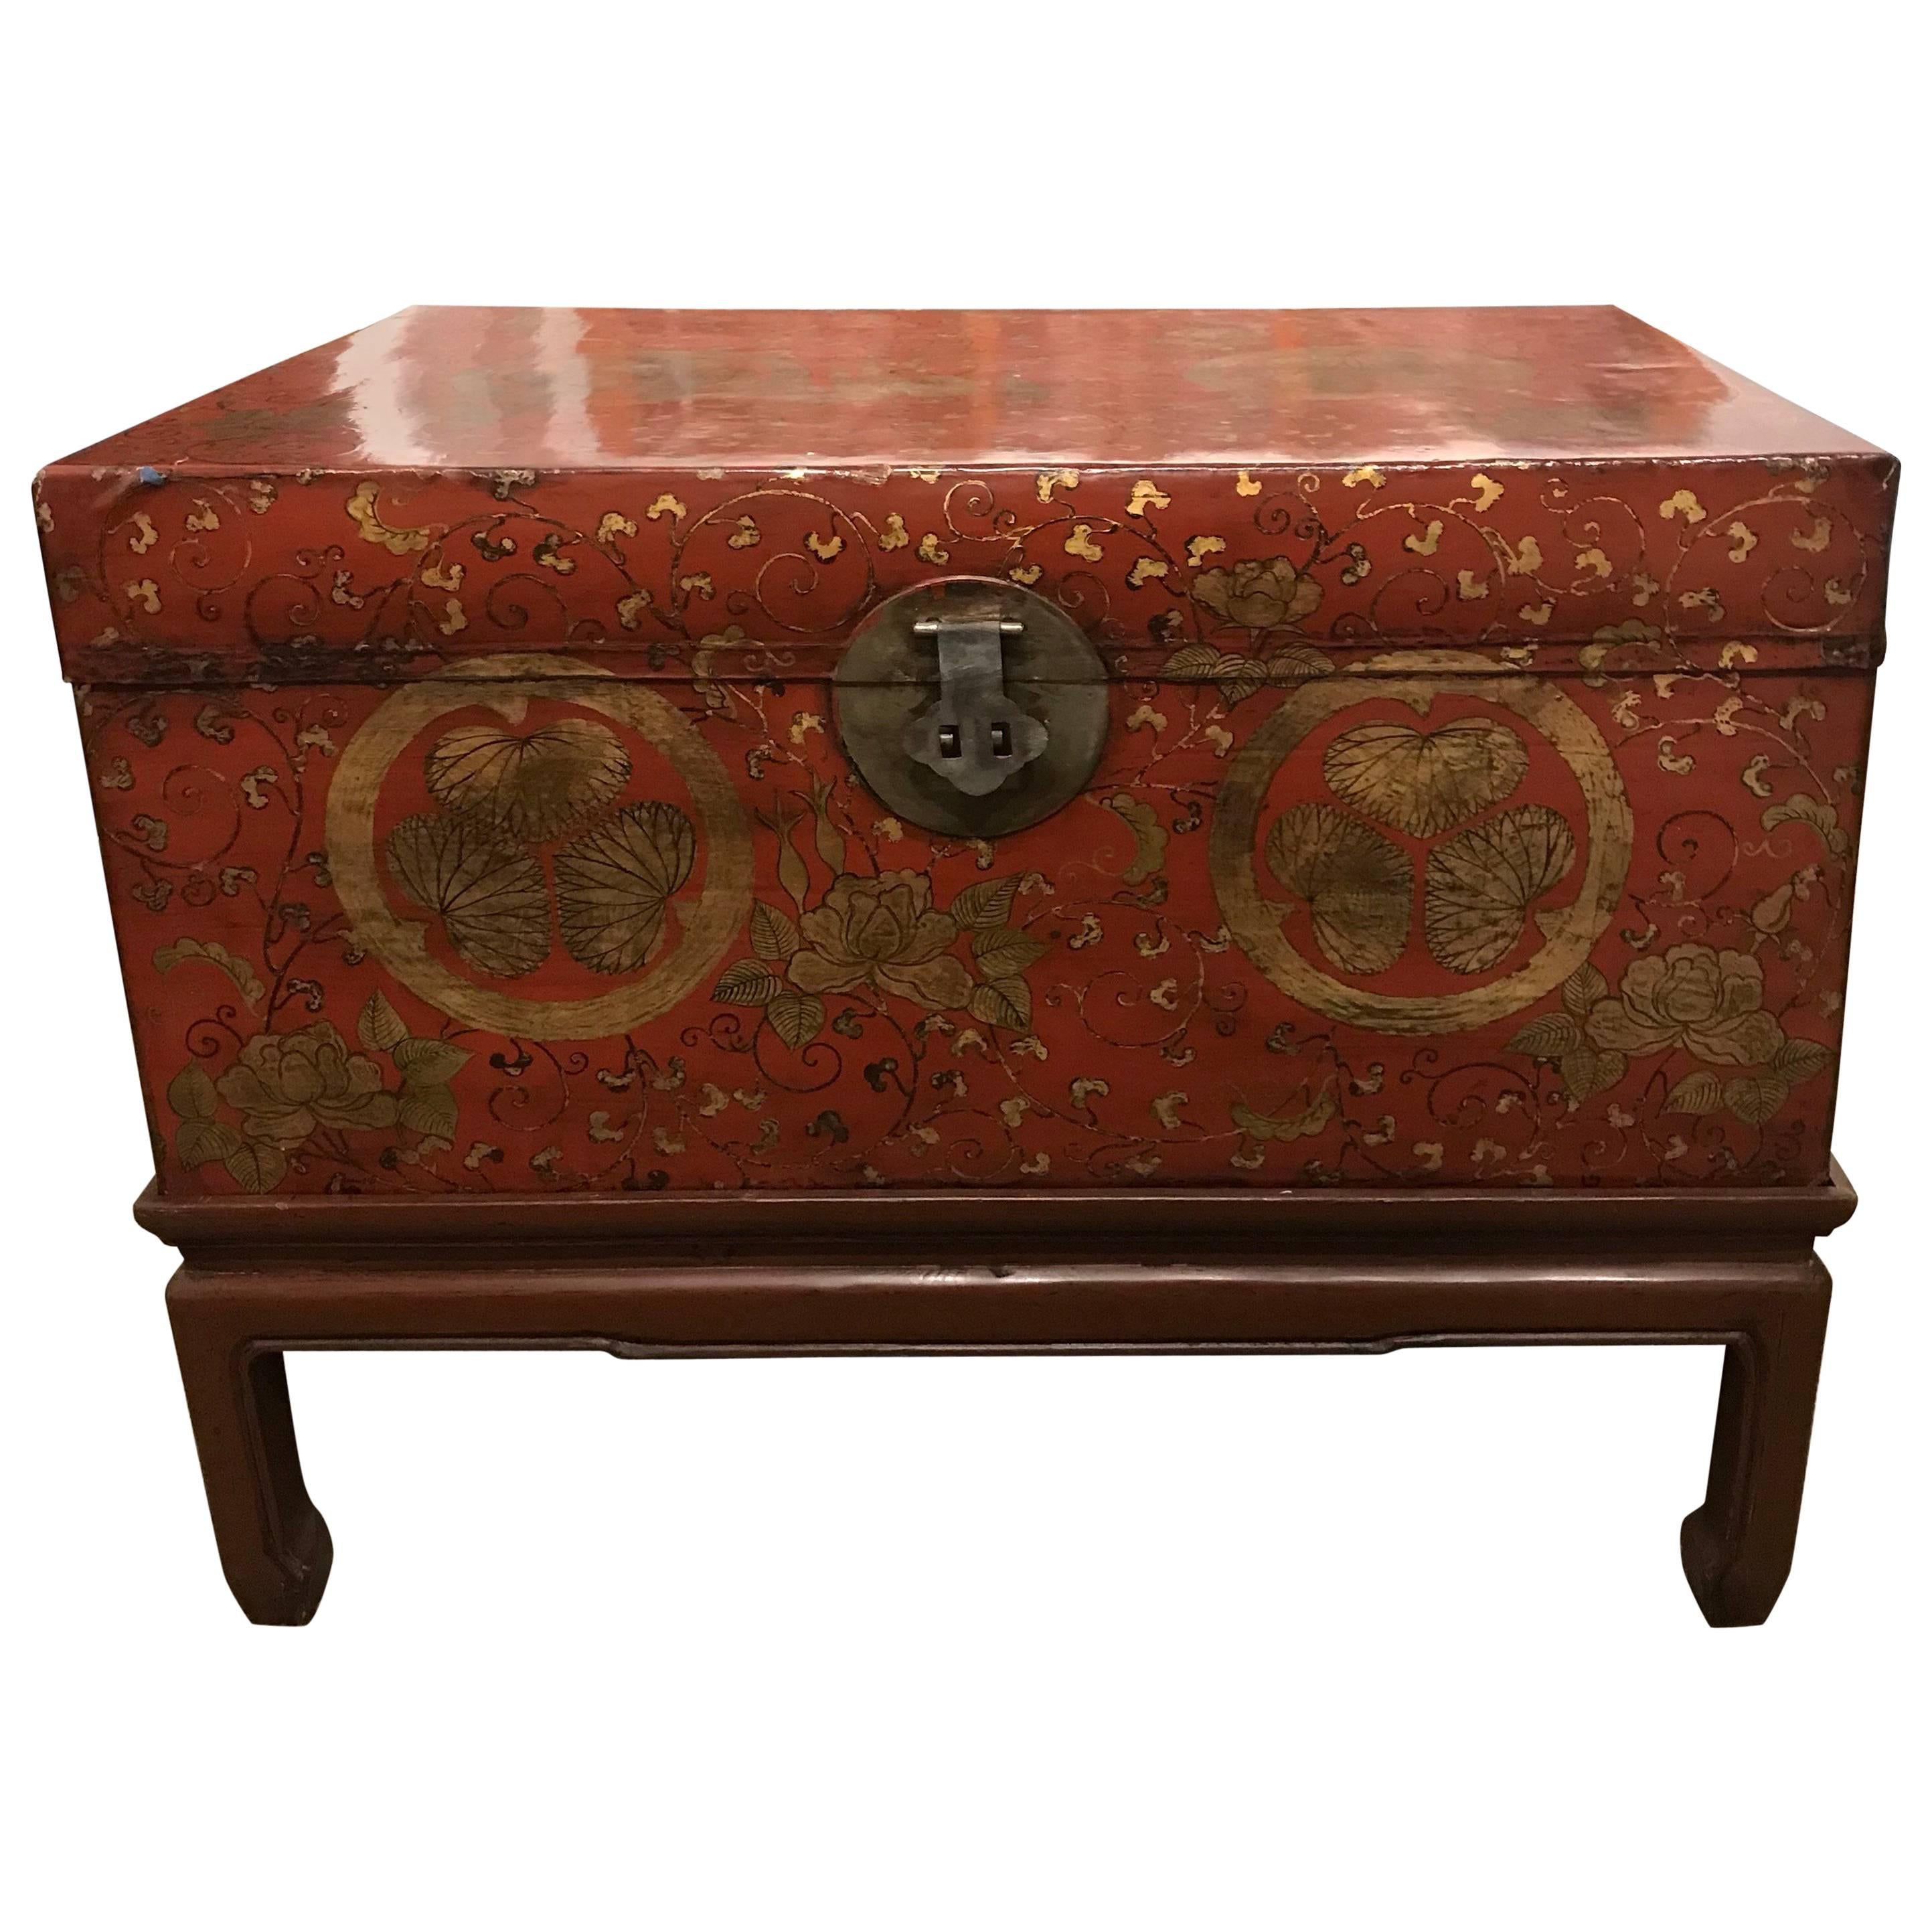 Antique Chinese Red Leather Trunk